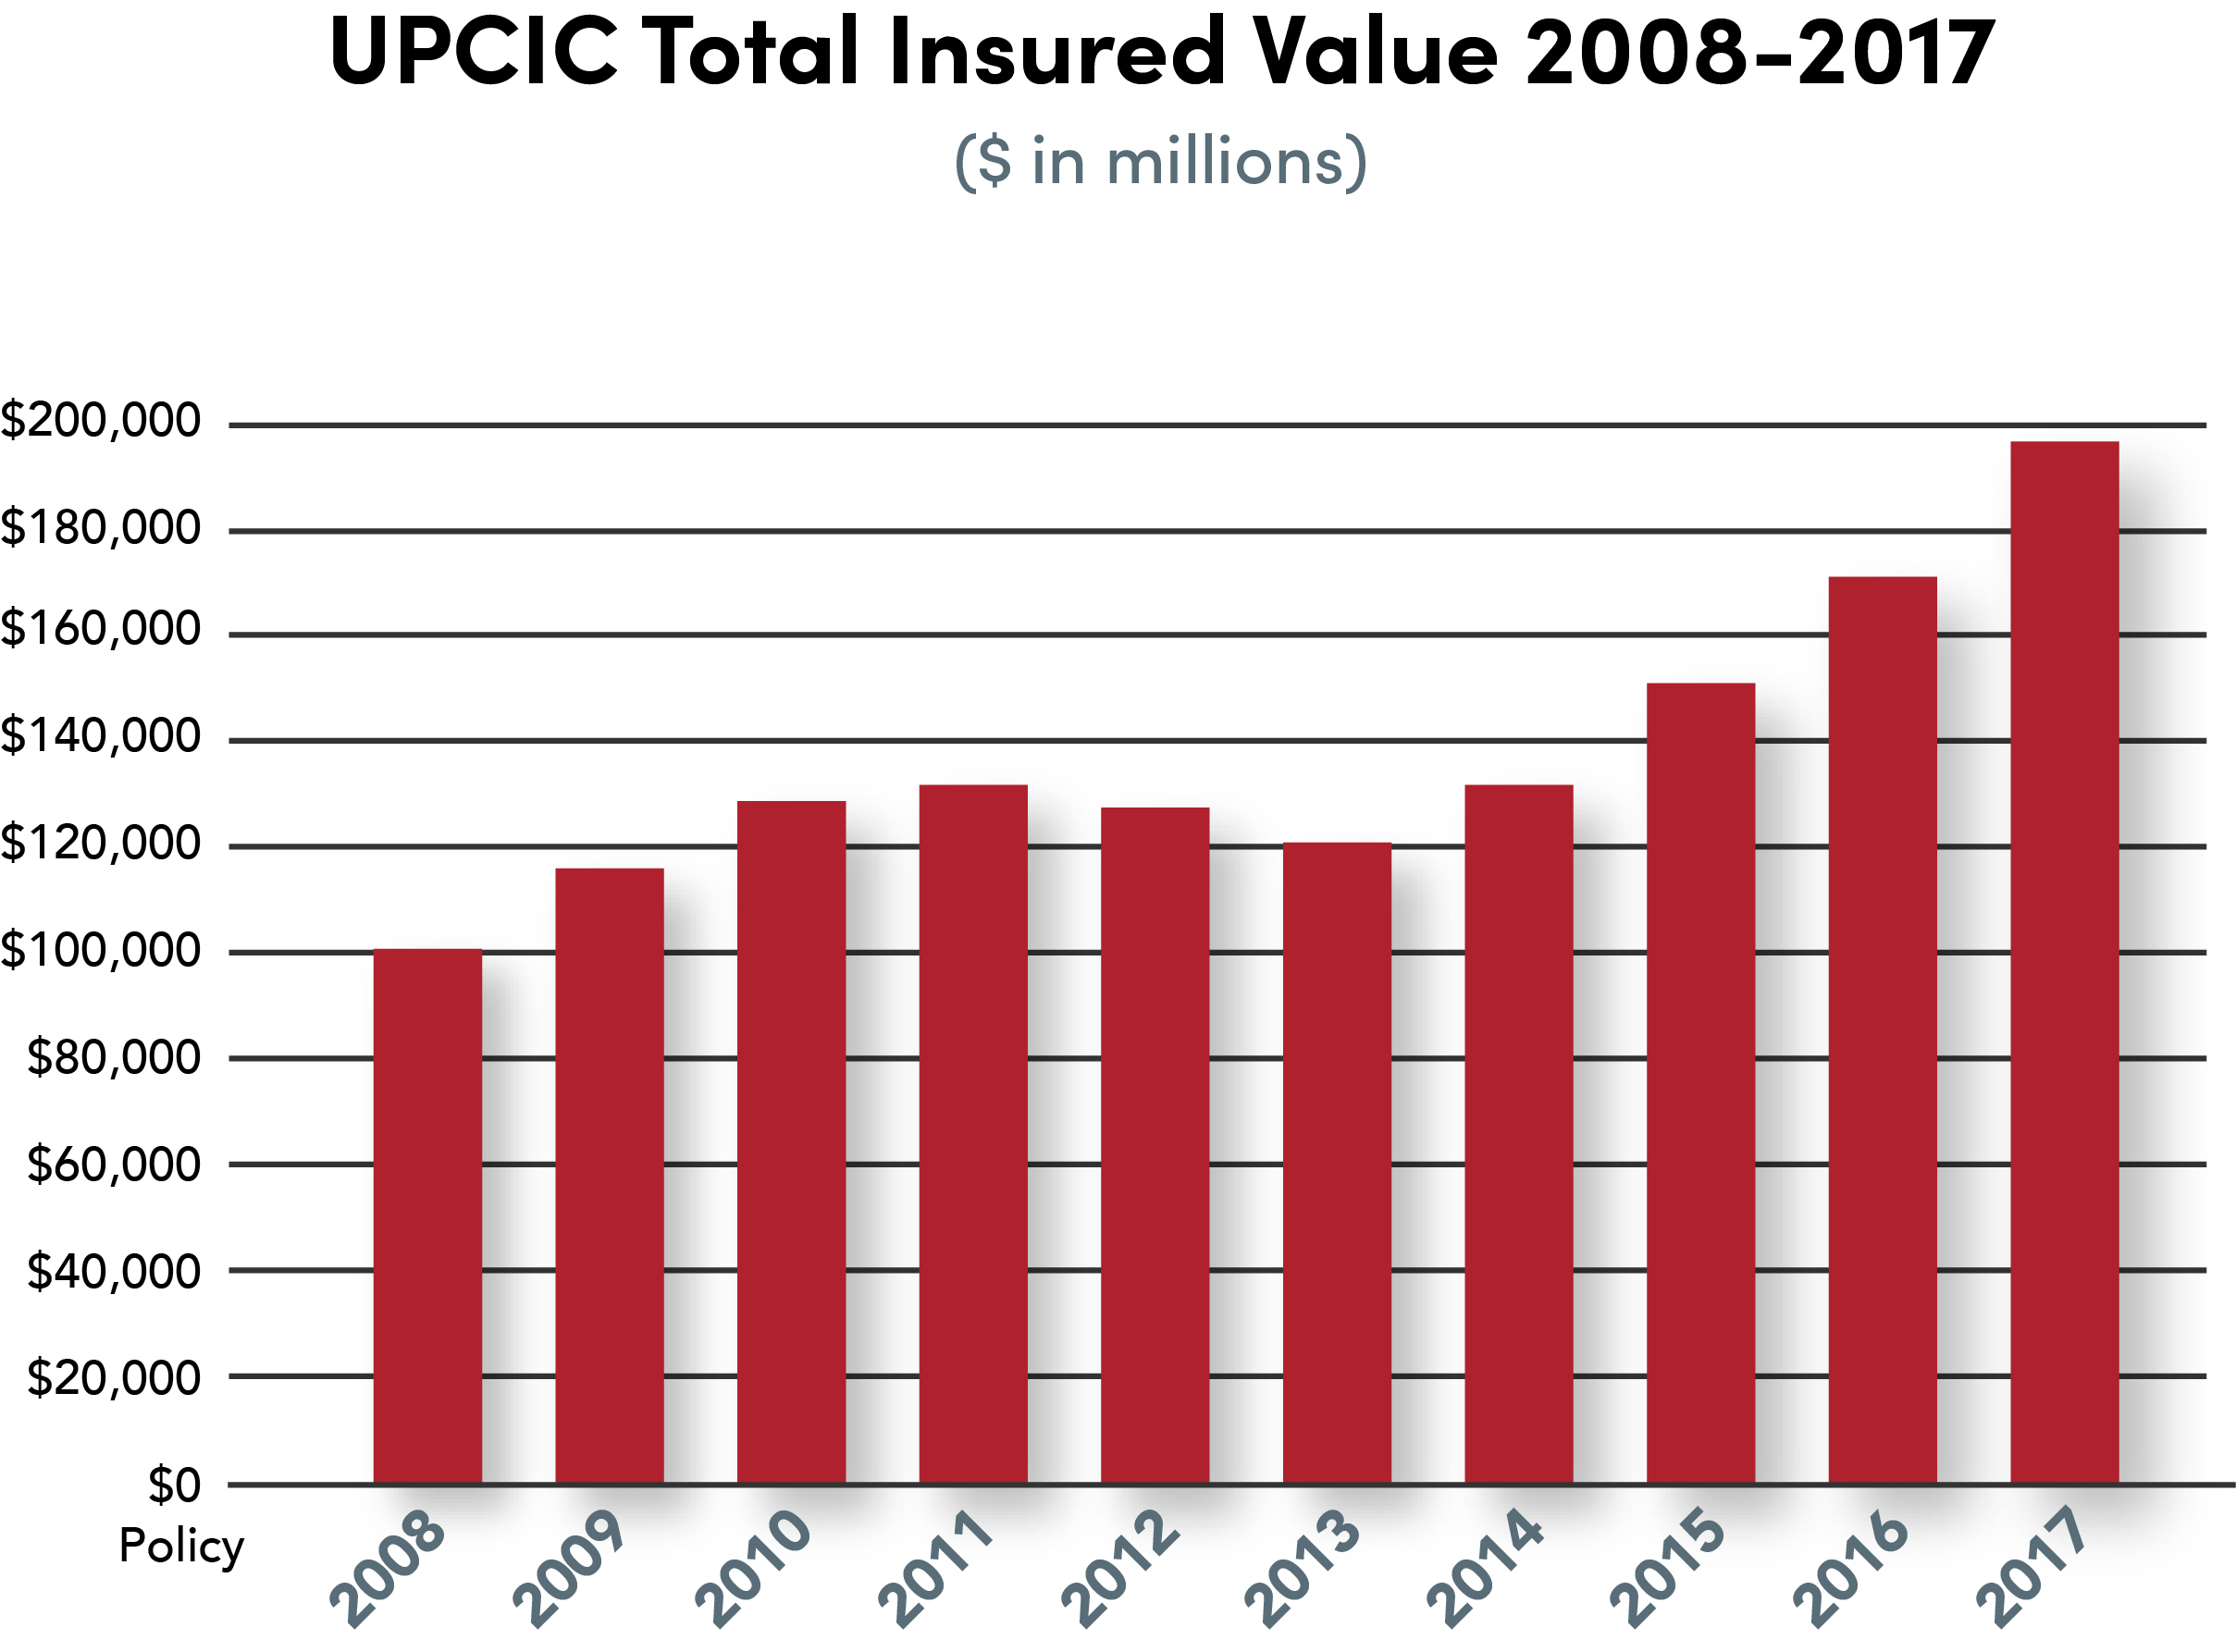 A graph of UPCIC total insured value